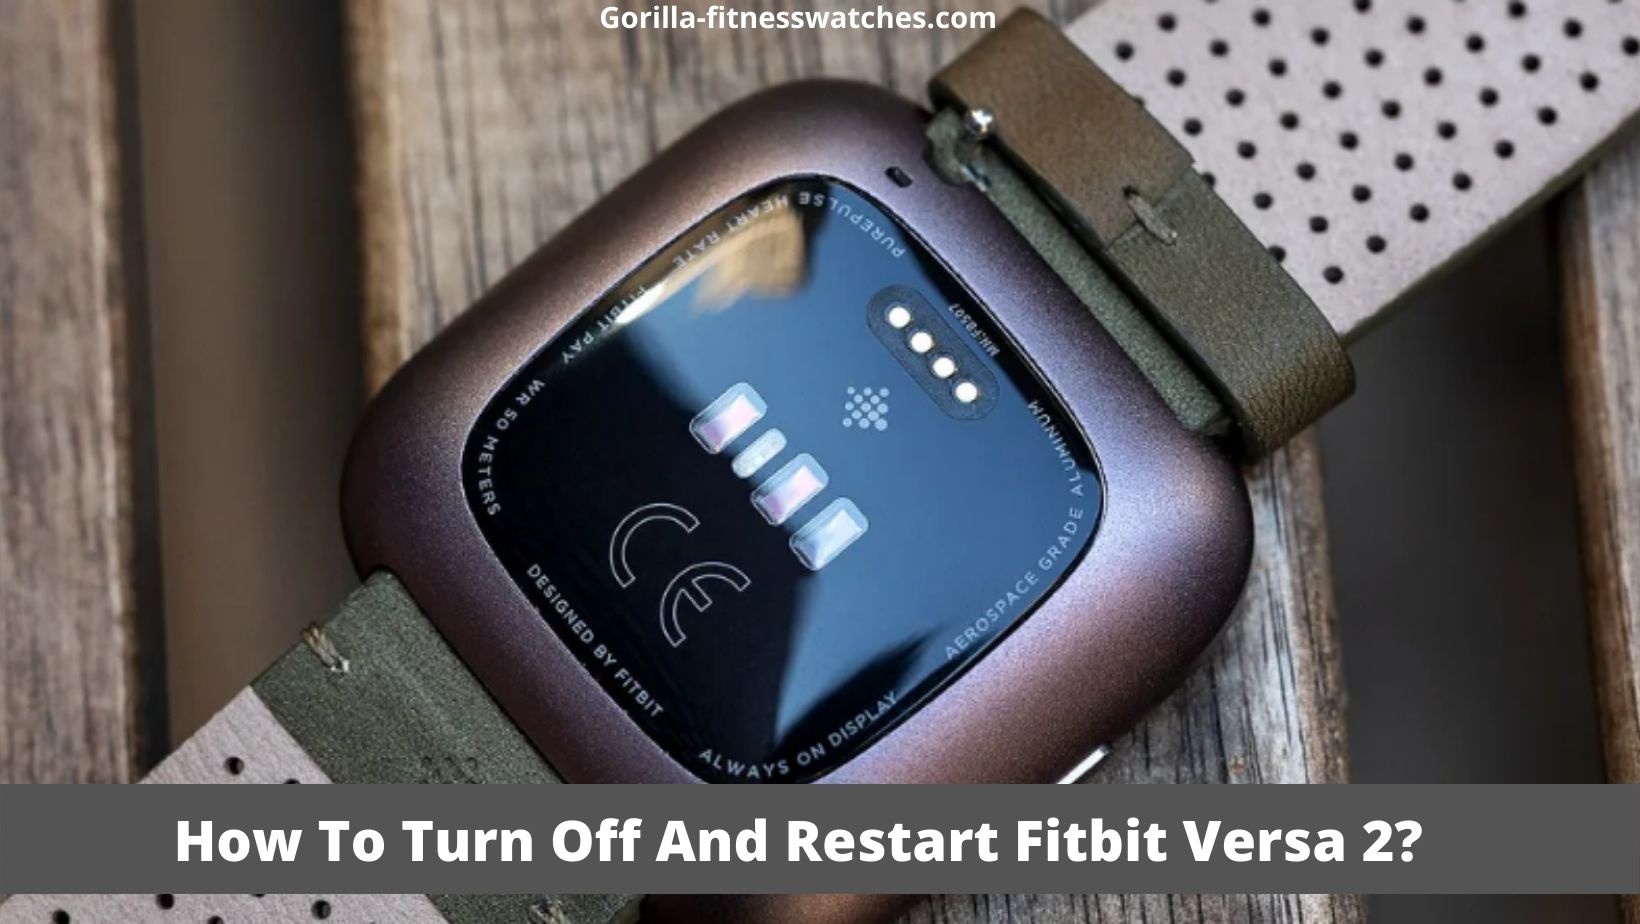 How To Turn Off And Restart Fitbit Versa 2?